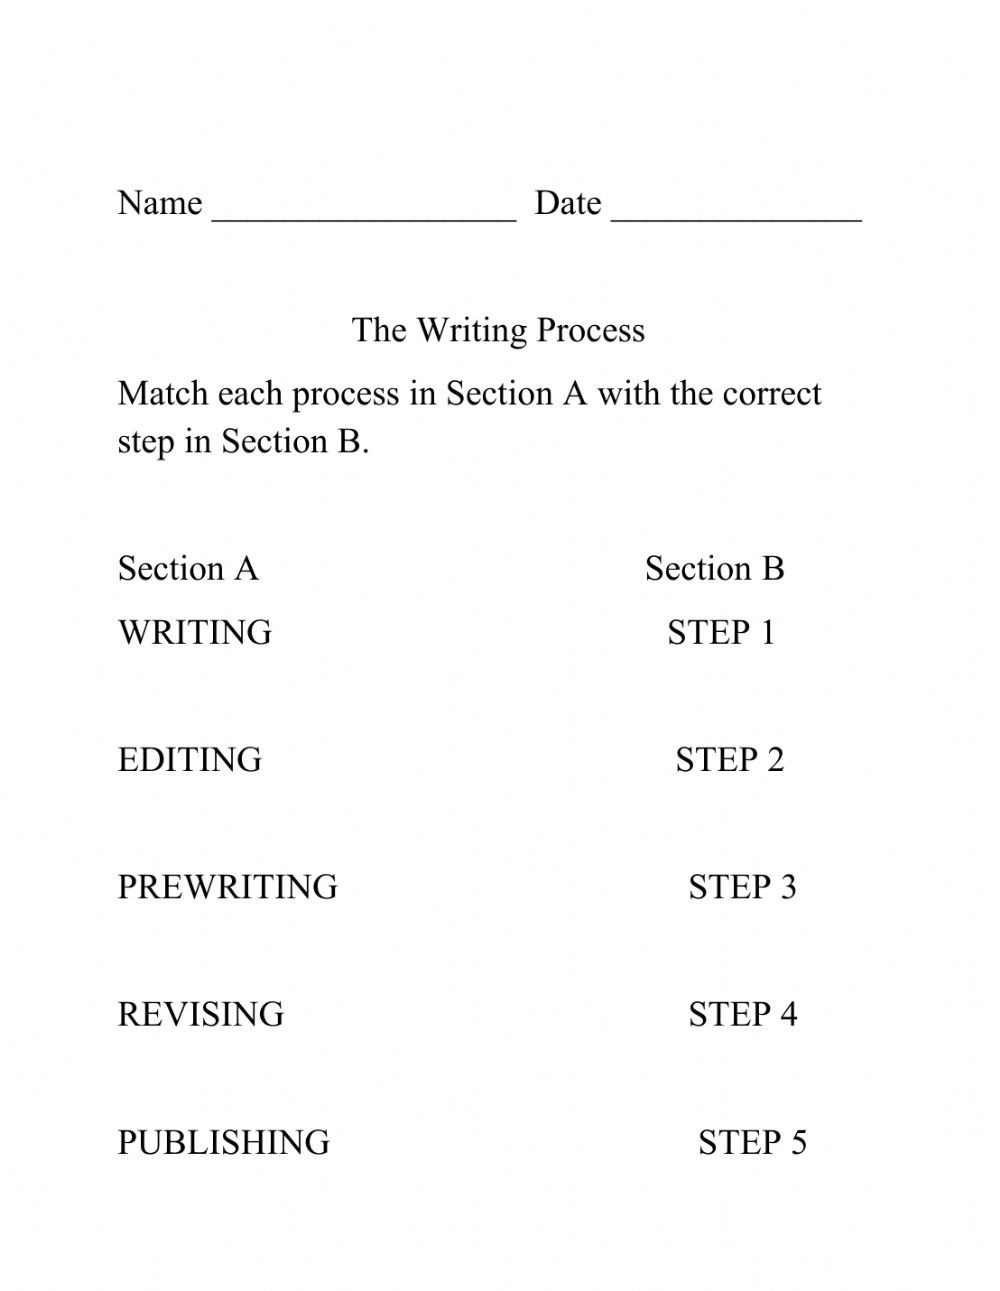 The Writing Process Worksheet